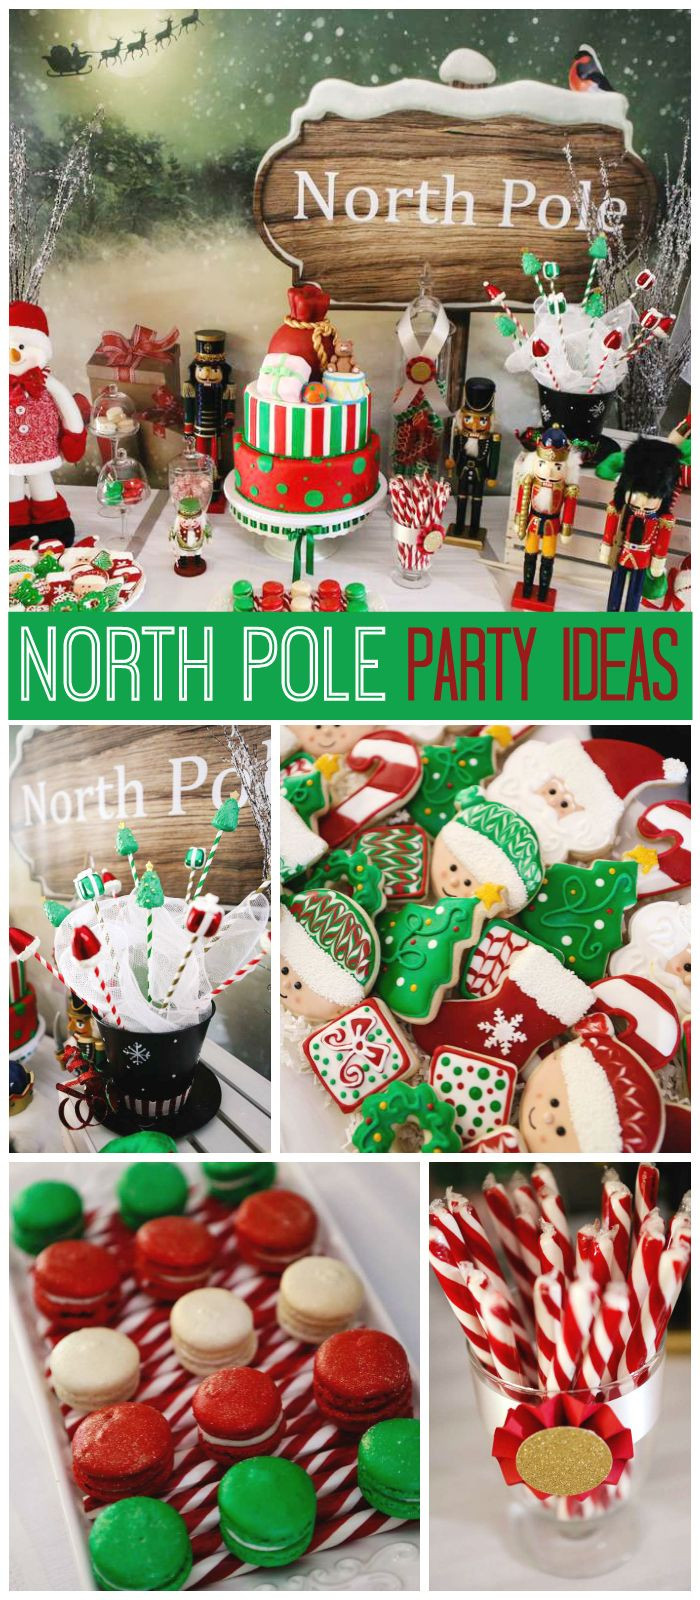 Christmas Party Ideas
 25 best ideas about Christmas Party Themes on Pinterest